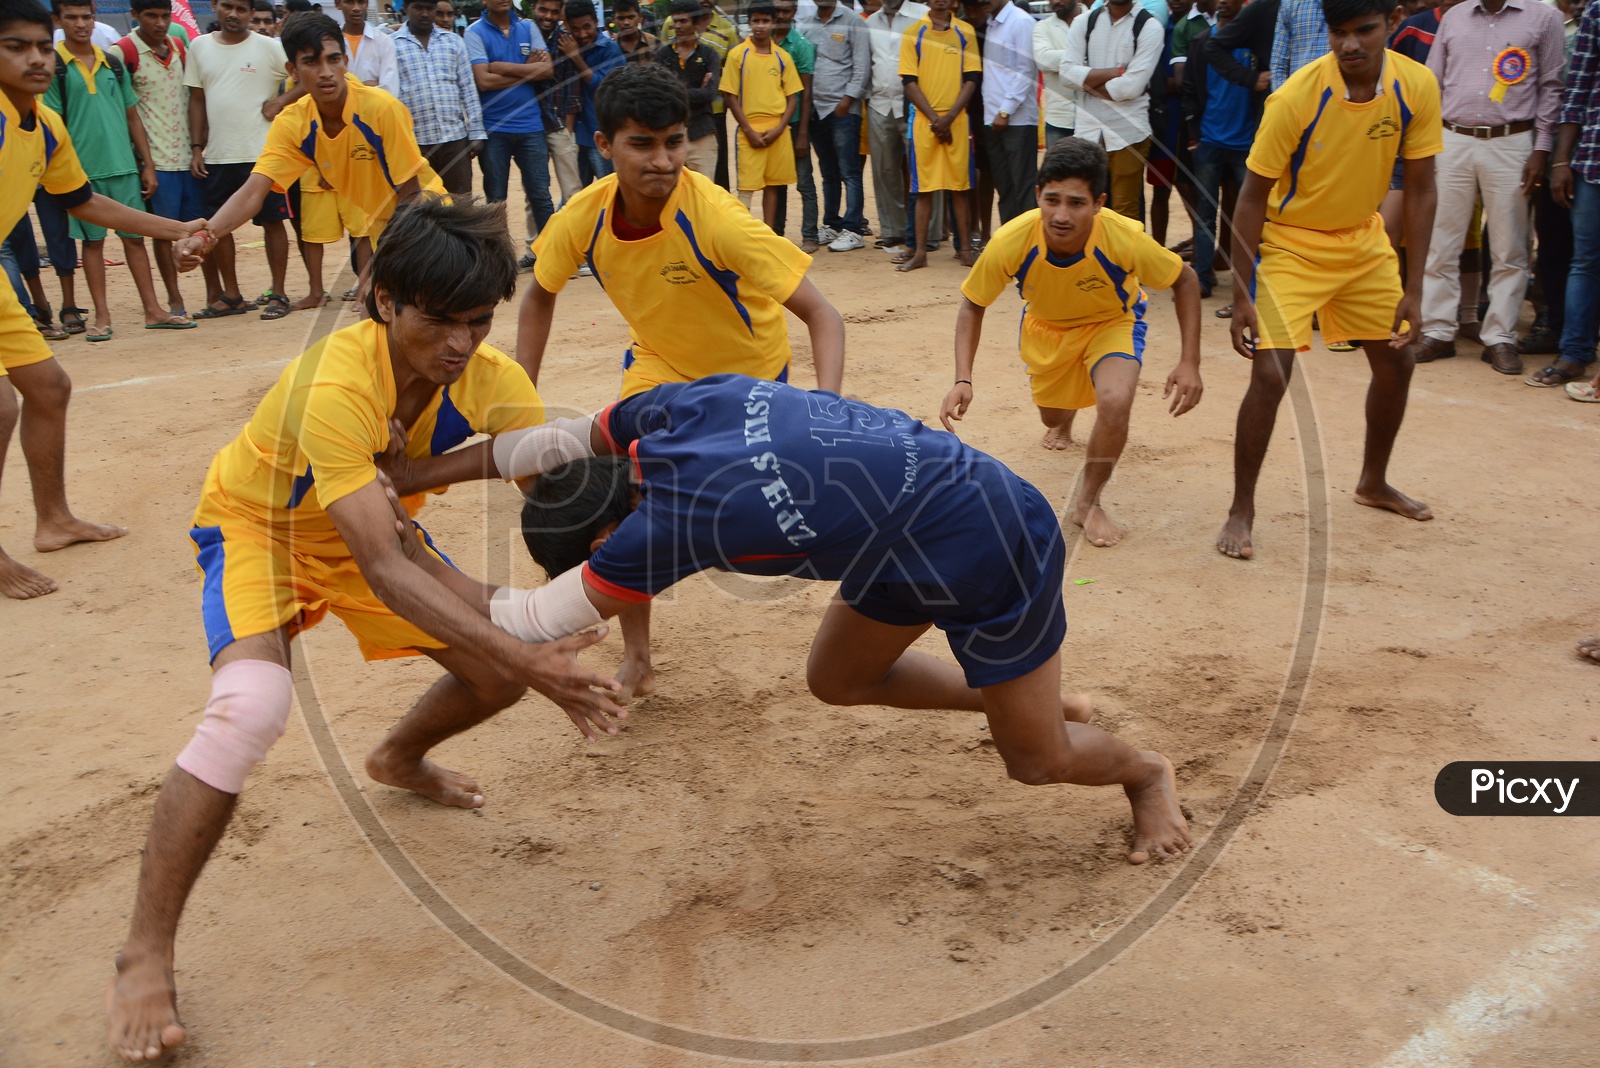 Young   Athletes Playing  Kabbadi  In a School Sports Event